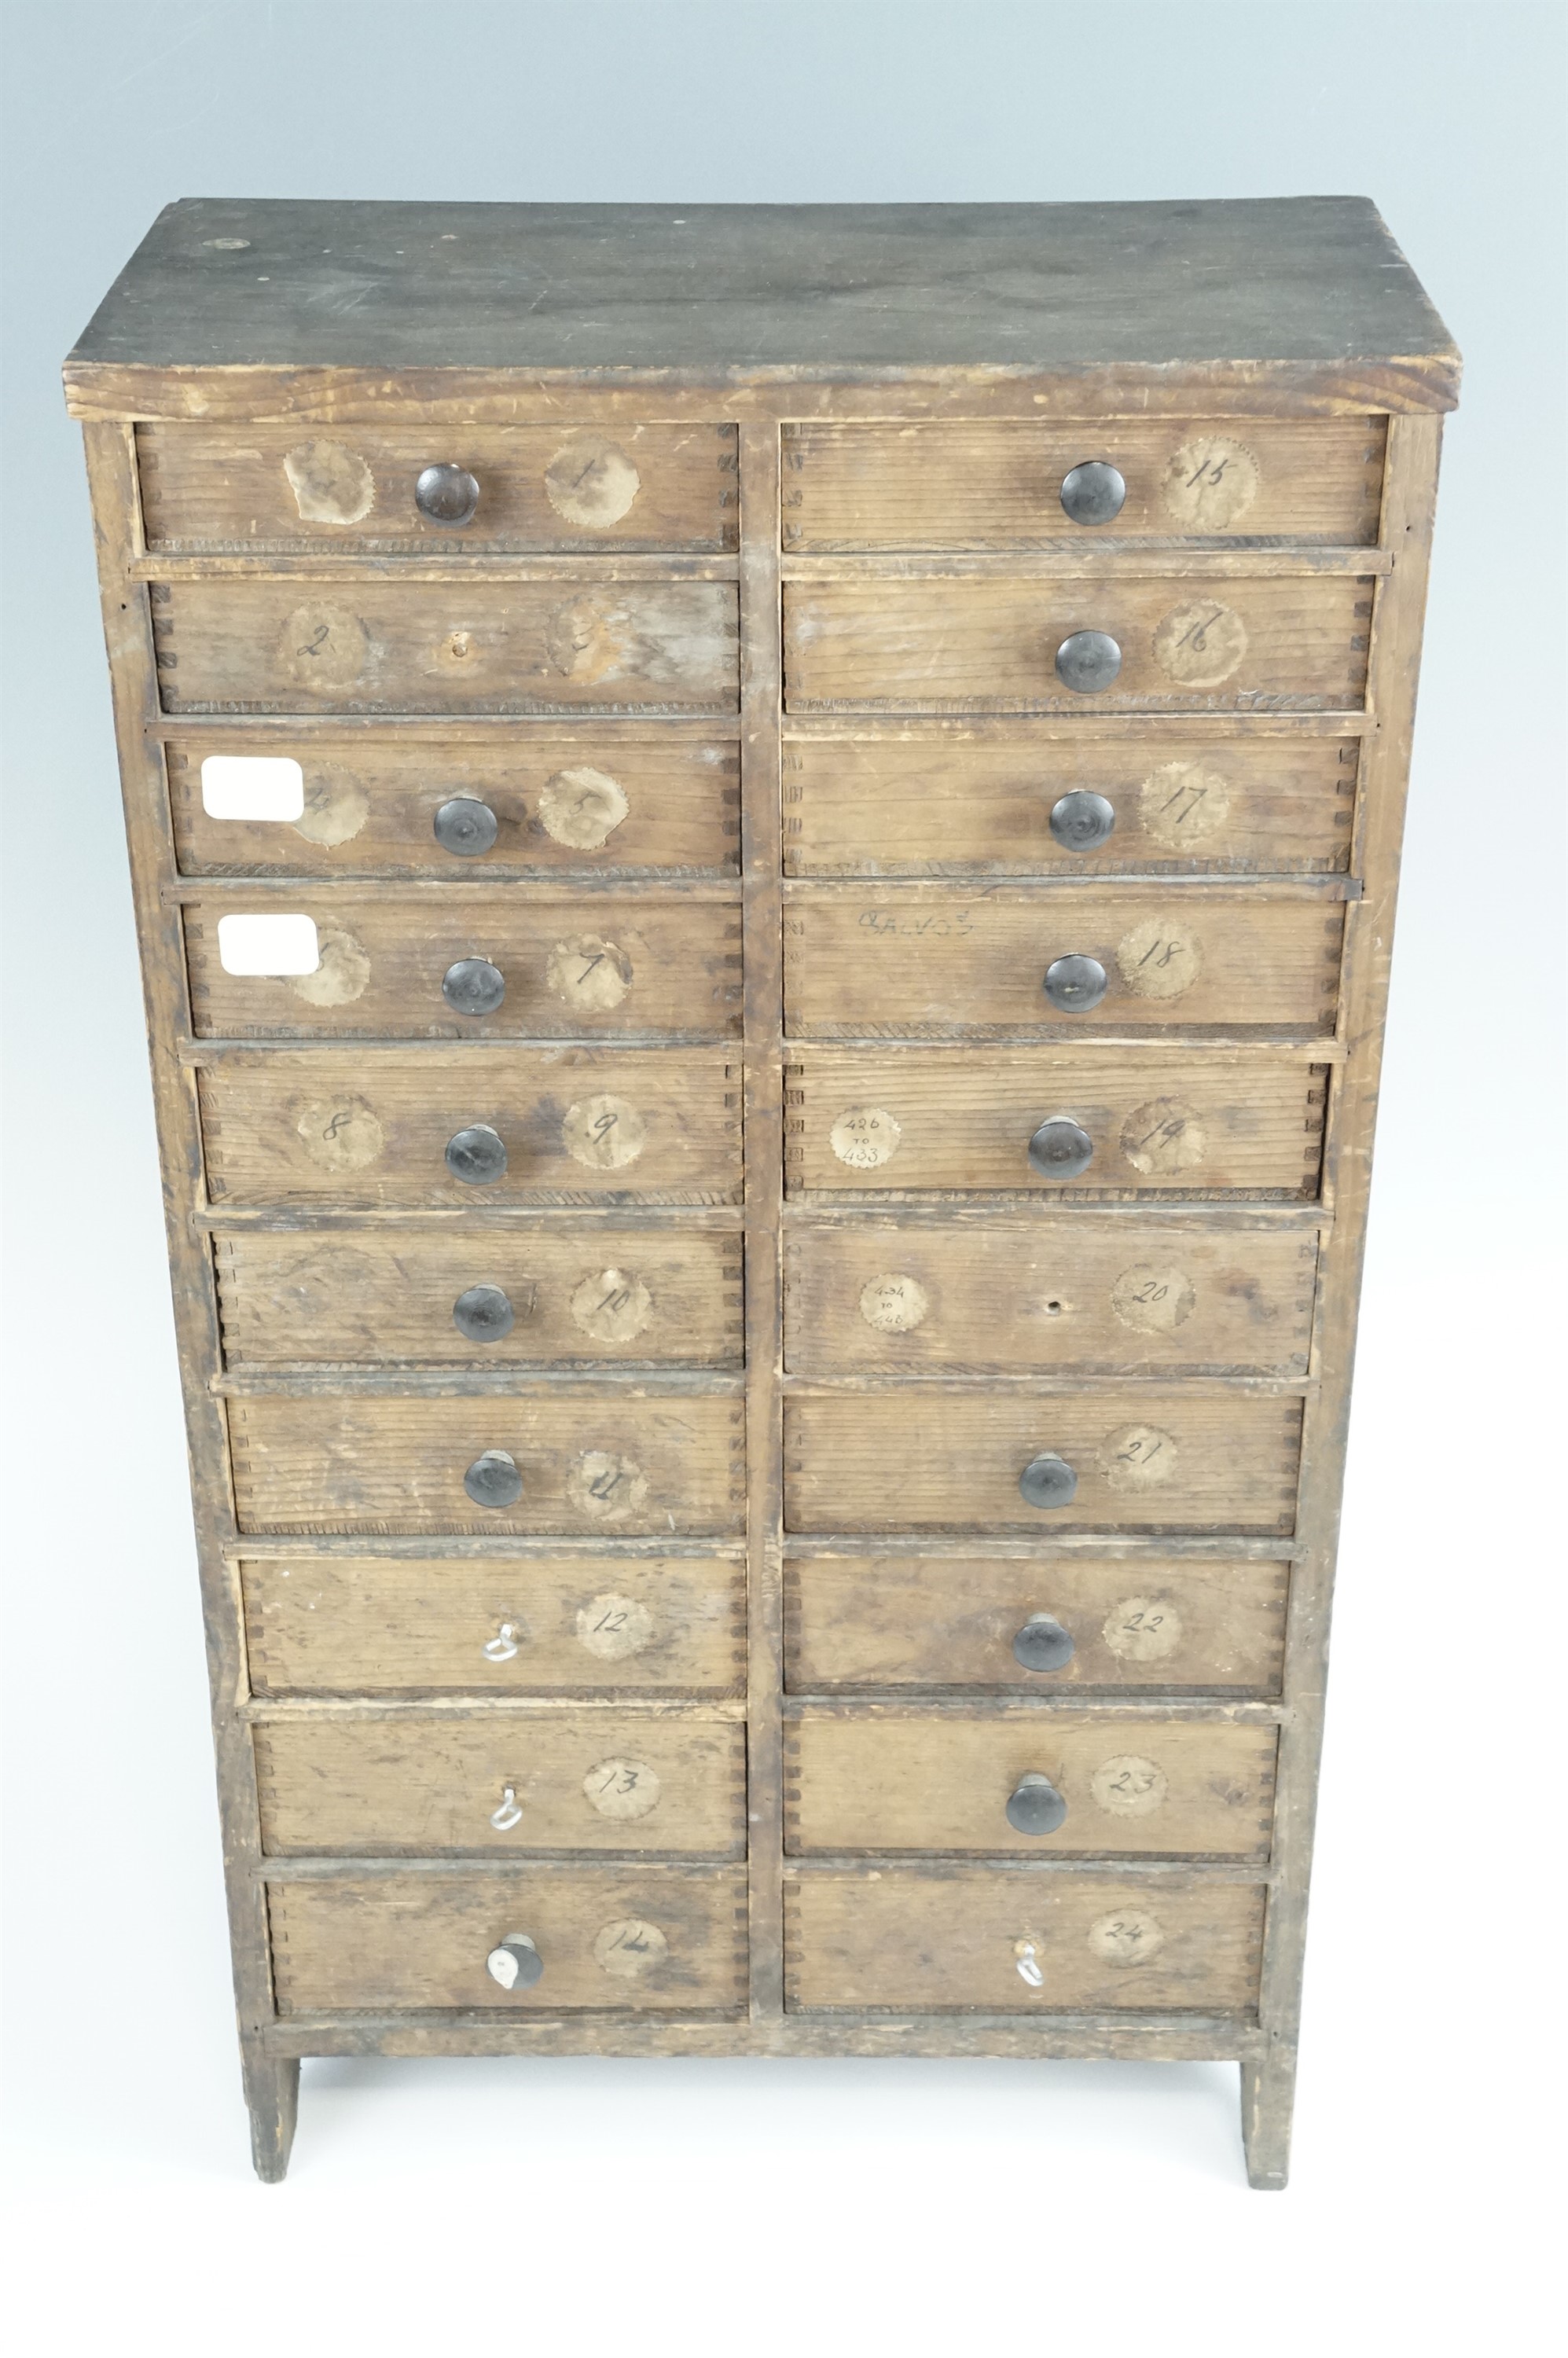 A set of watchmaker's pine watch glass drawers containing a large quantity of vintage watch glasses - Image 4 of 4